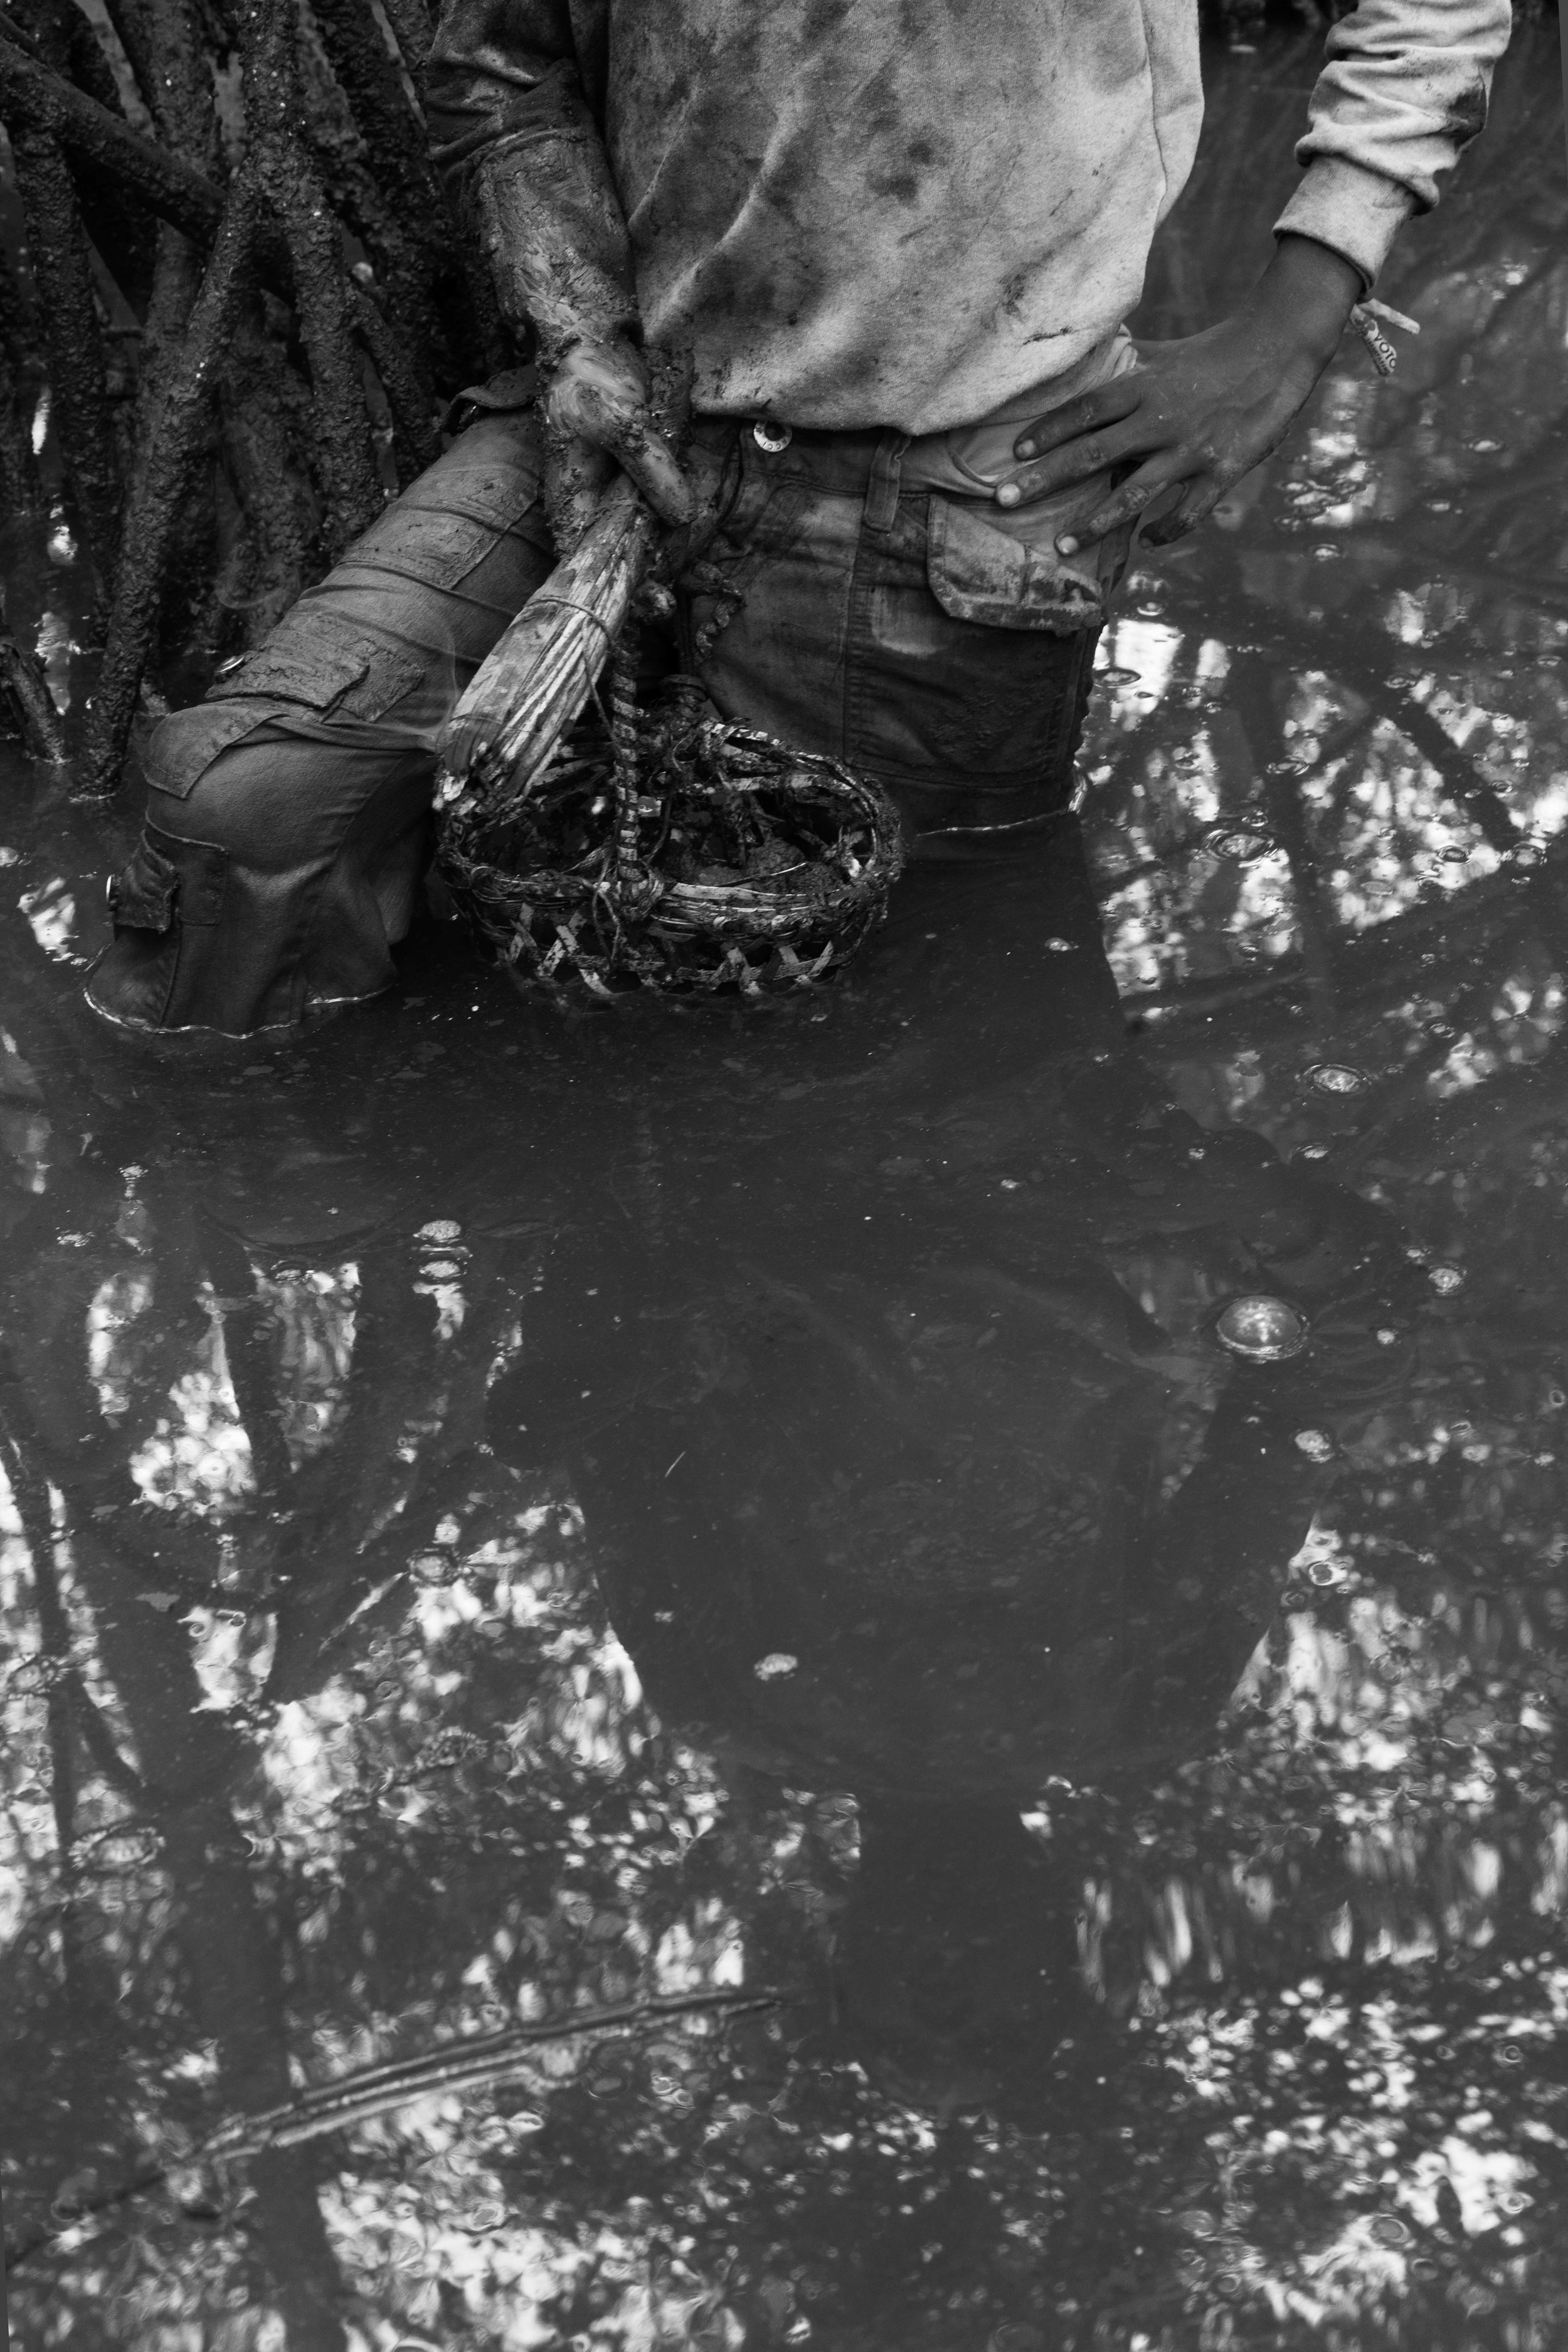  The reflection of Diego Reasco holding his basket and torch can be seen in the water of the Cayapas Mataje Mangrove Reserve. Work days in the mangrove are determined by the ebb and flow of the water. 2014. 